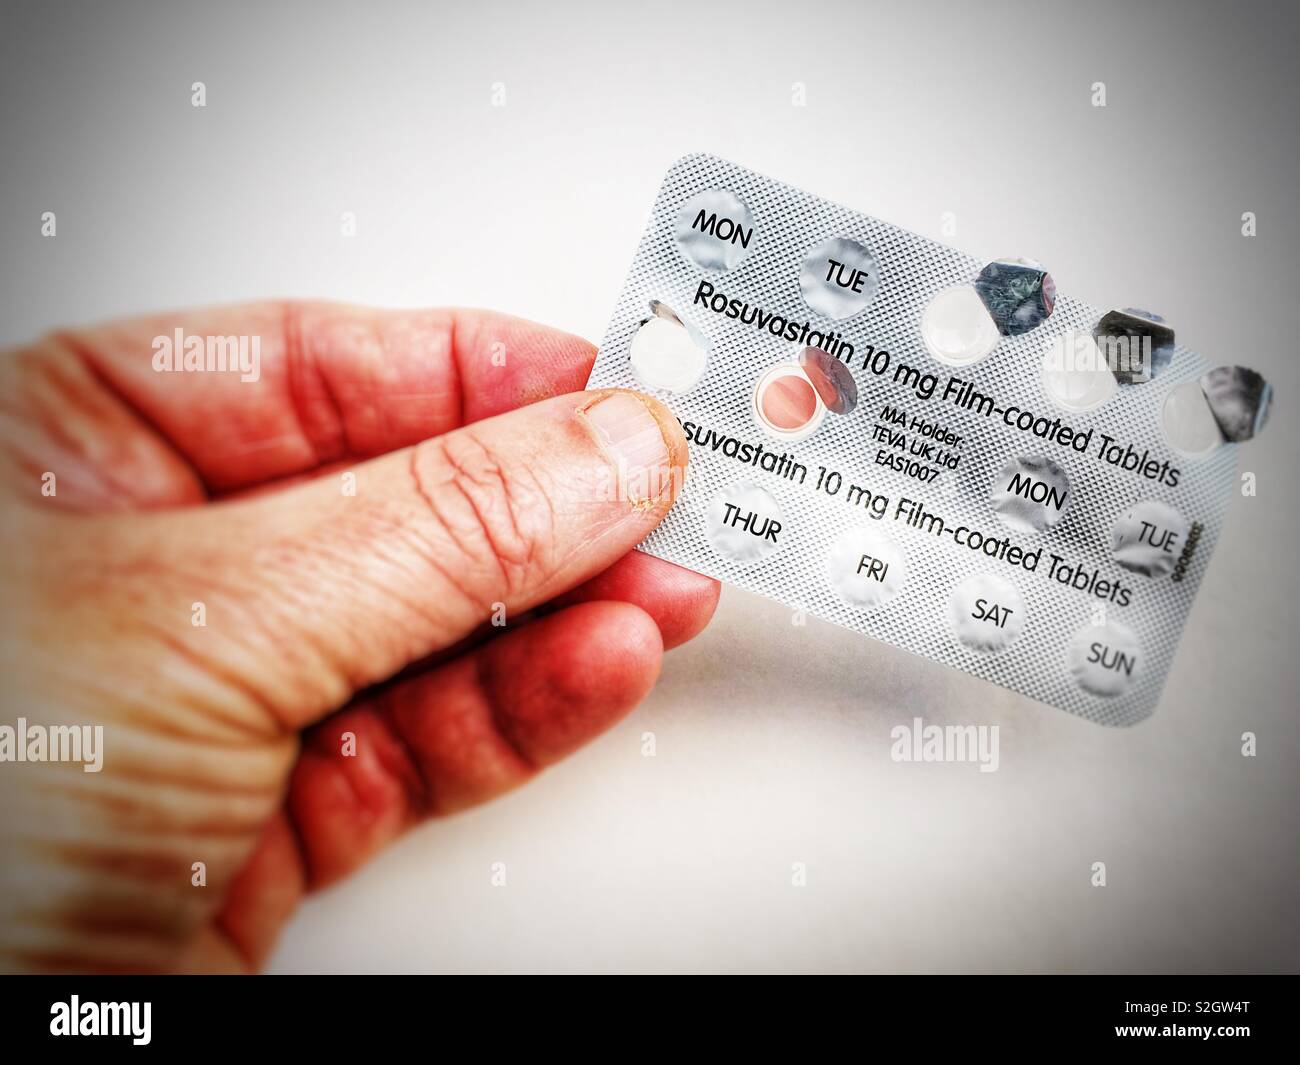 Rosuvastatin High Resolution Stock Photography and Images - Alamy